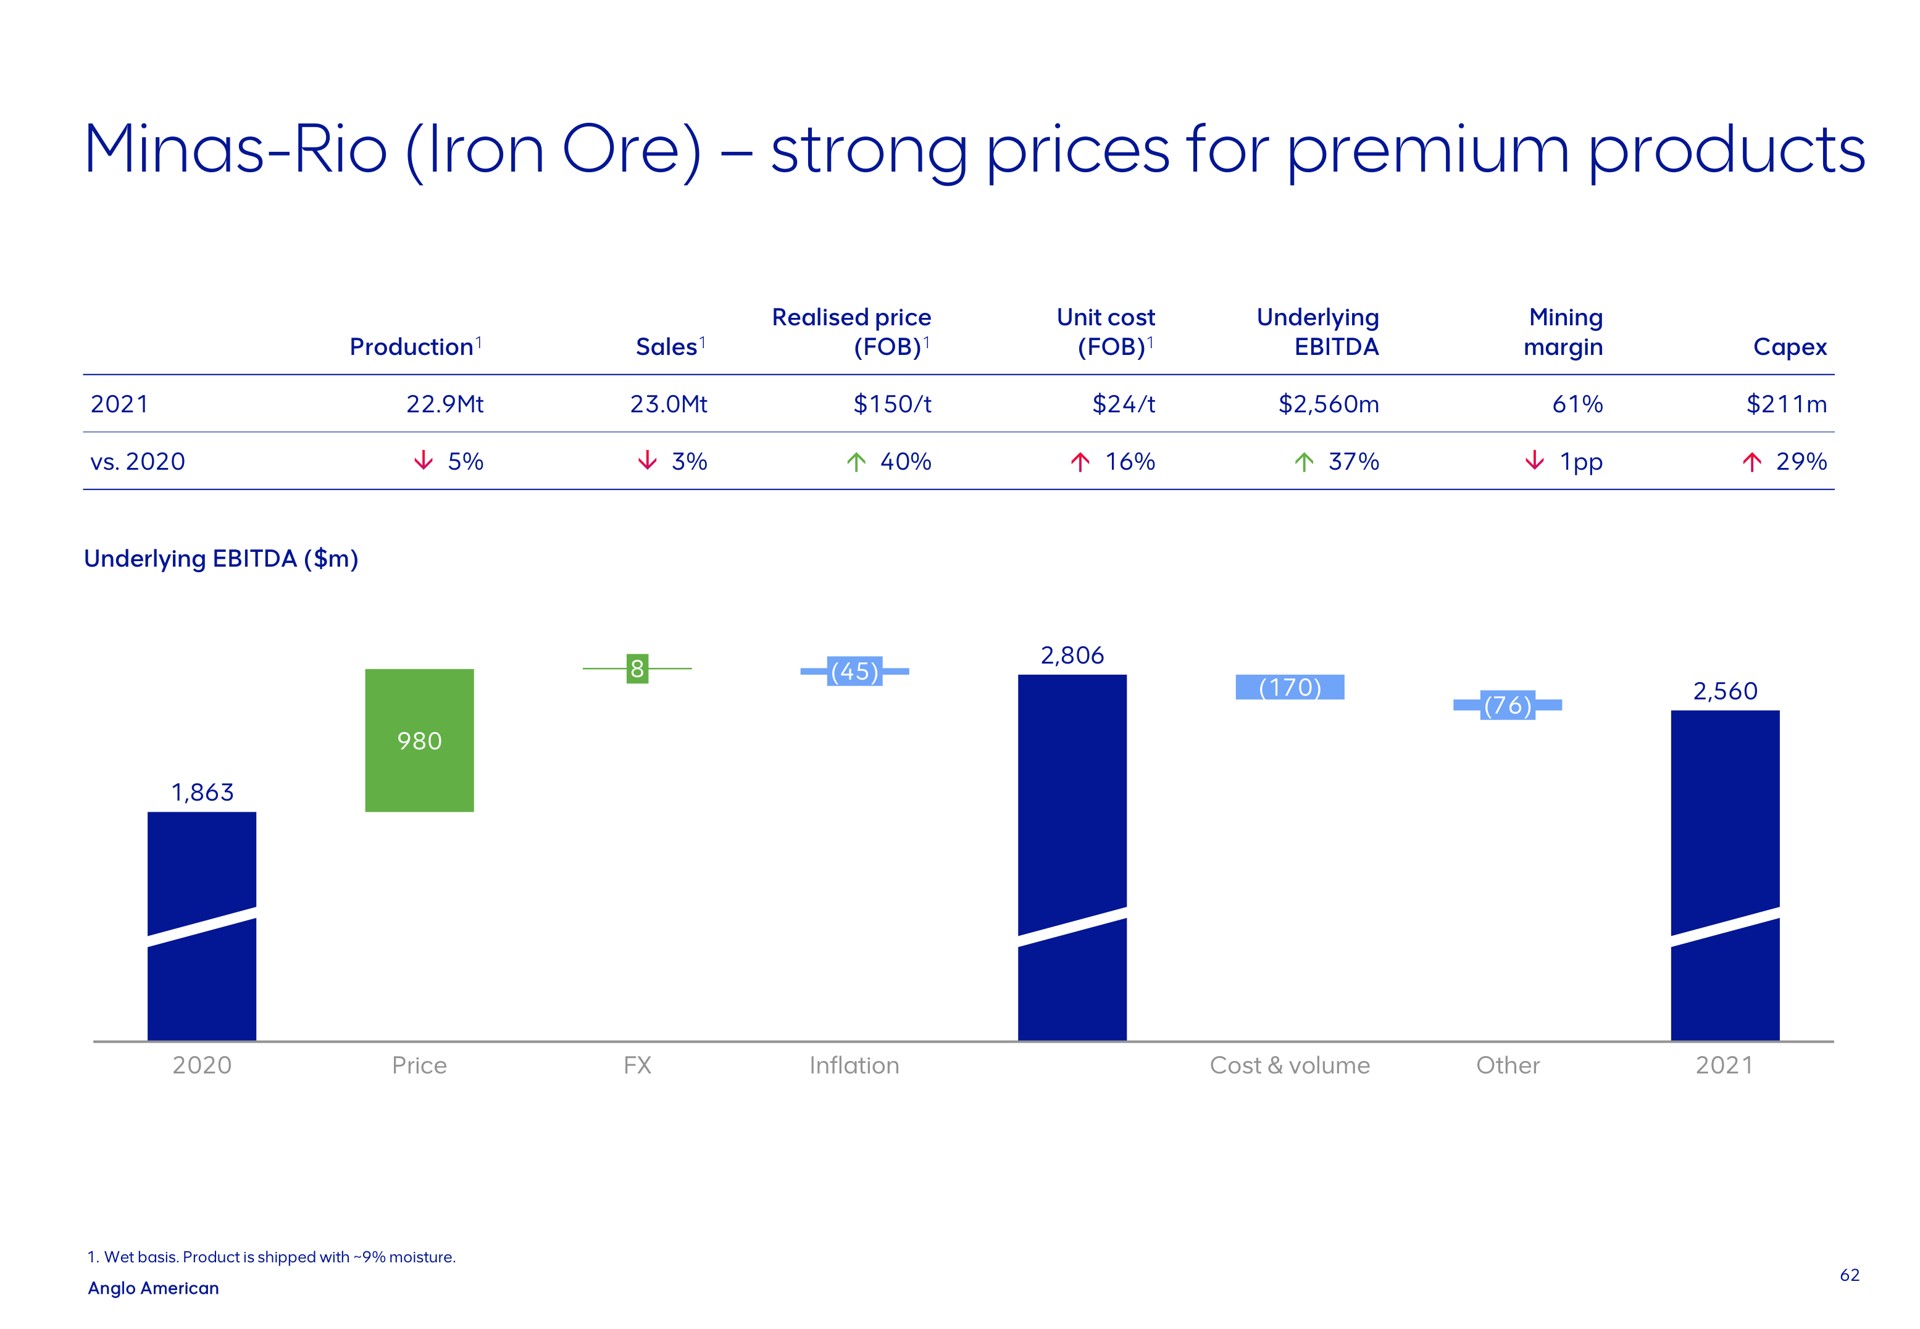 minas rio iron ore strong prices for premium products | AngloAmerican